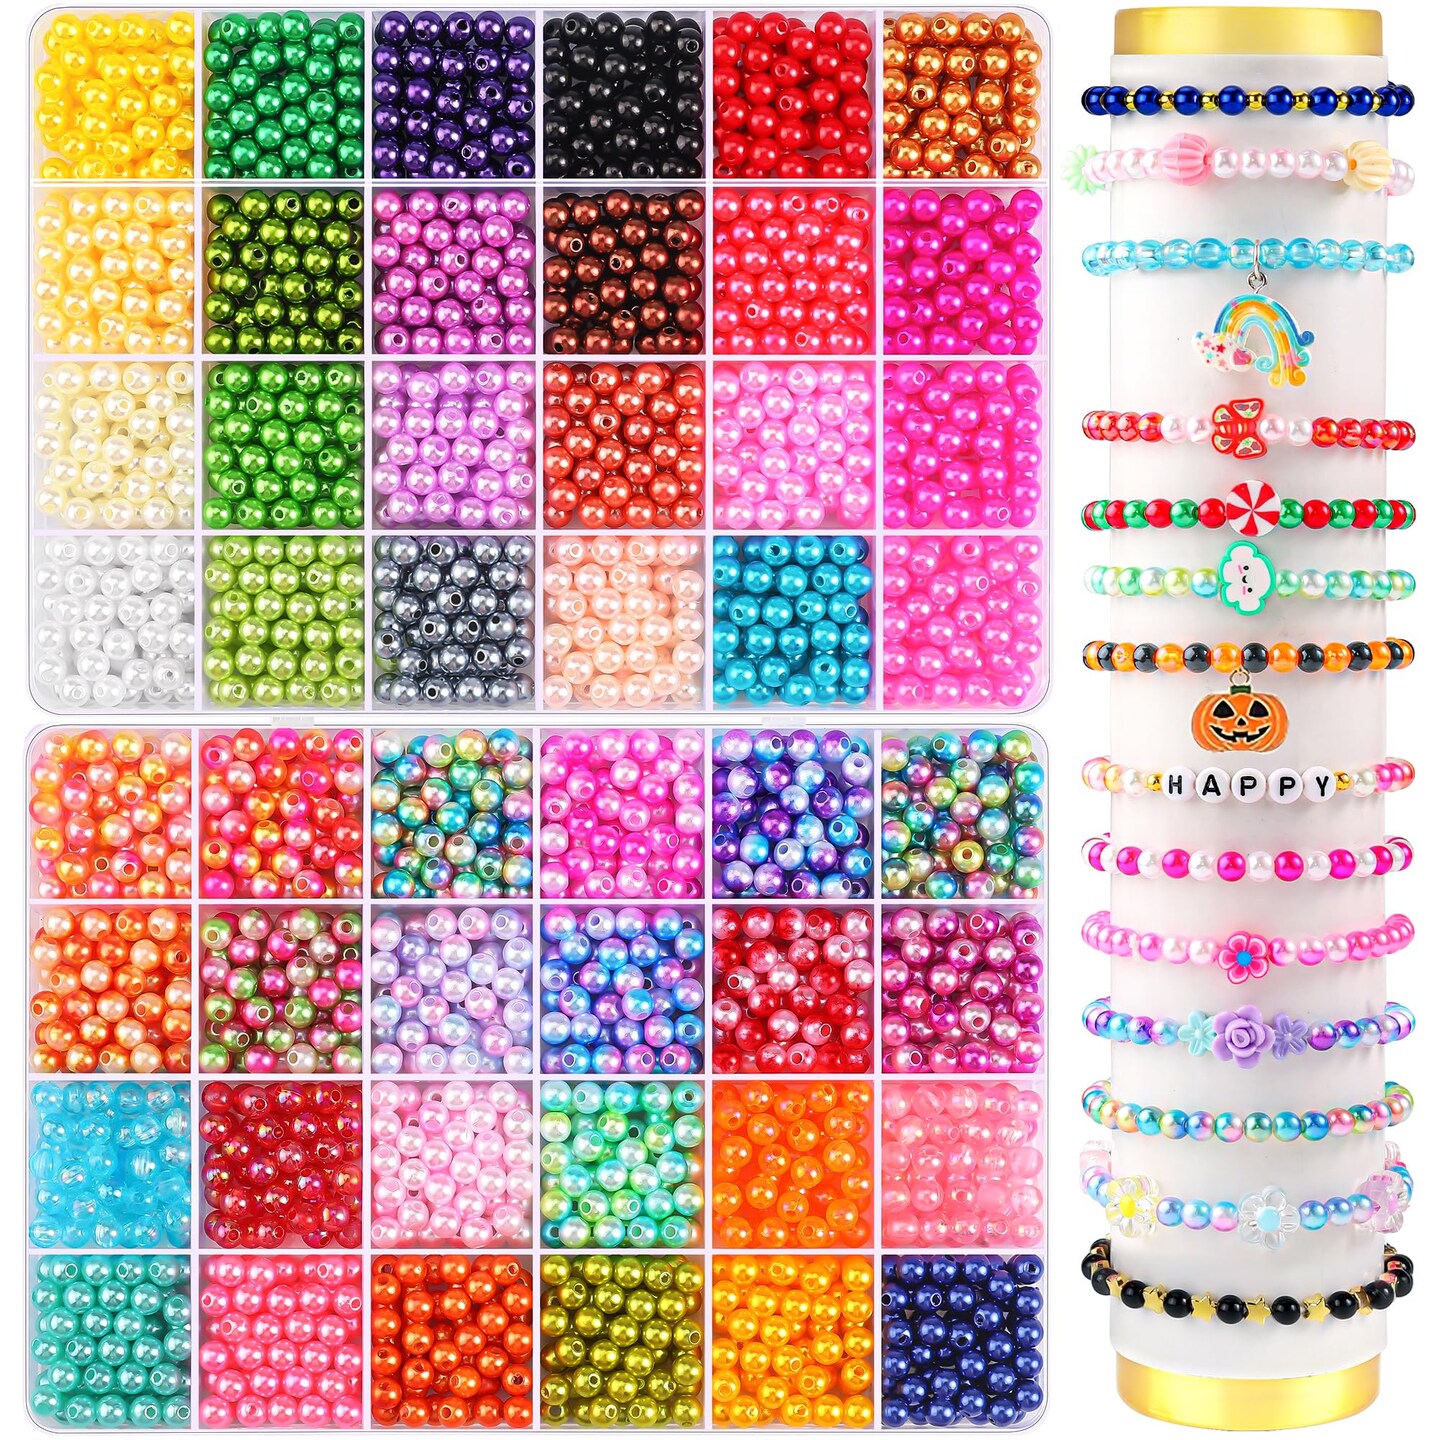 2400PCS Pearl Beads for Jewelry Making 48 Colorful 6mm Round Pearl Beads for Bracelets Making Kit Small Pearl Filler Beads for DIY Craft Necklace Earrings